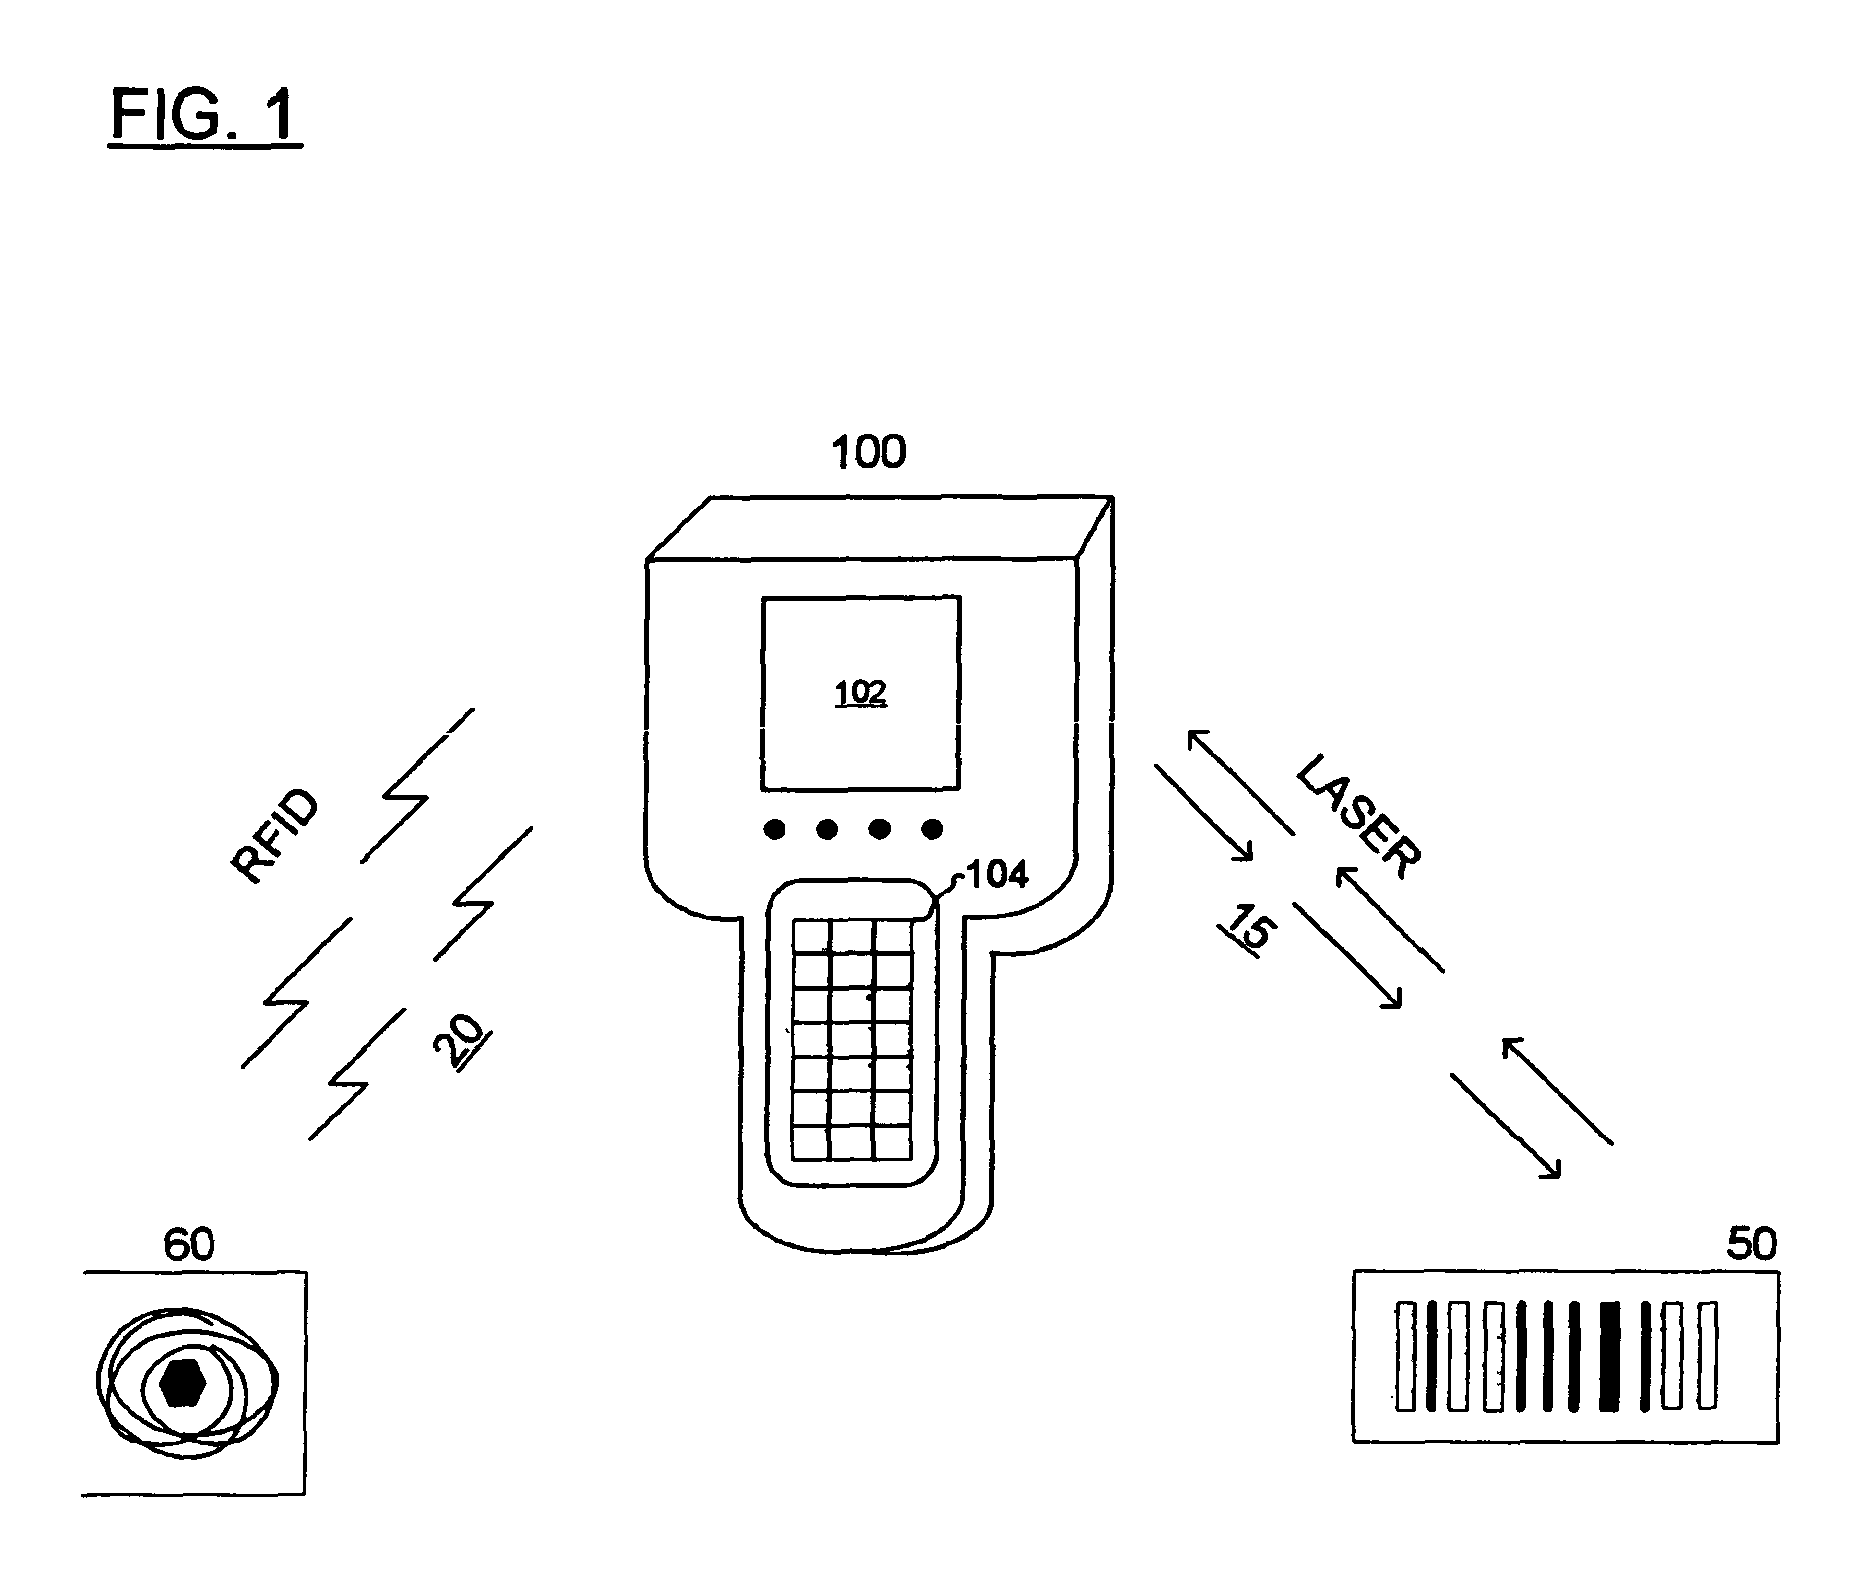 Systems and methods for automated programming of RFID tags using machine readable indicia